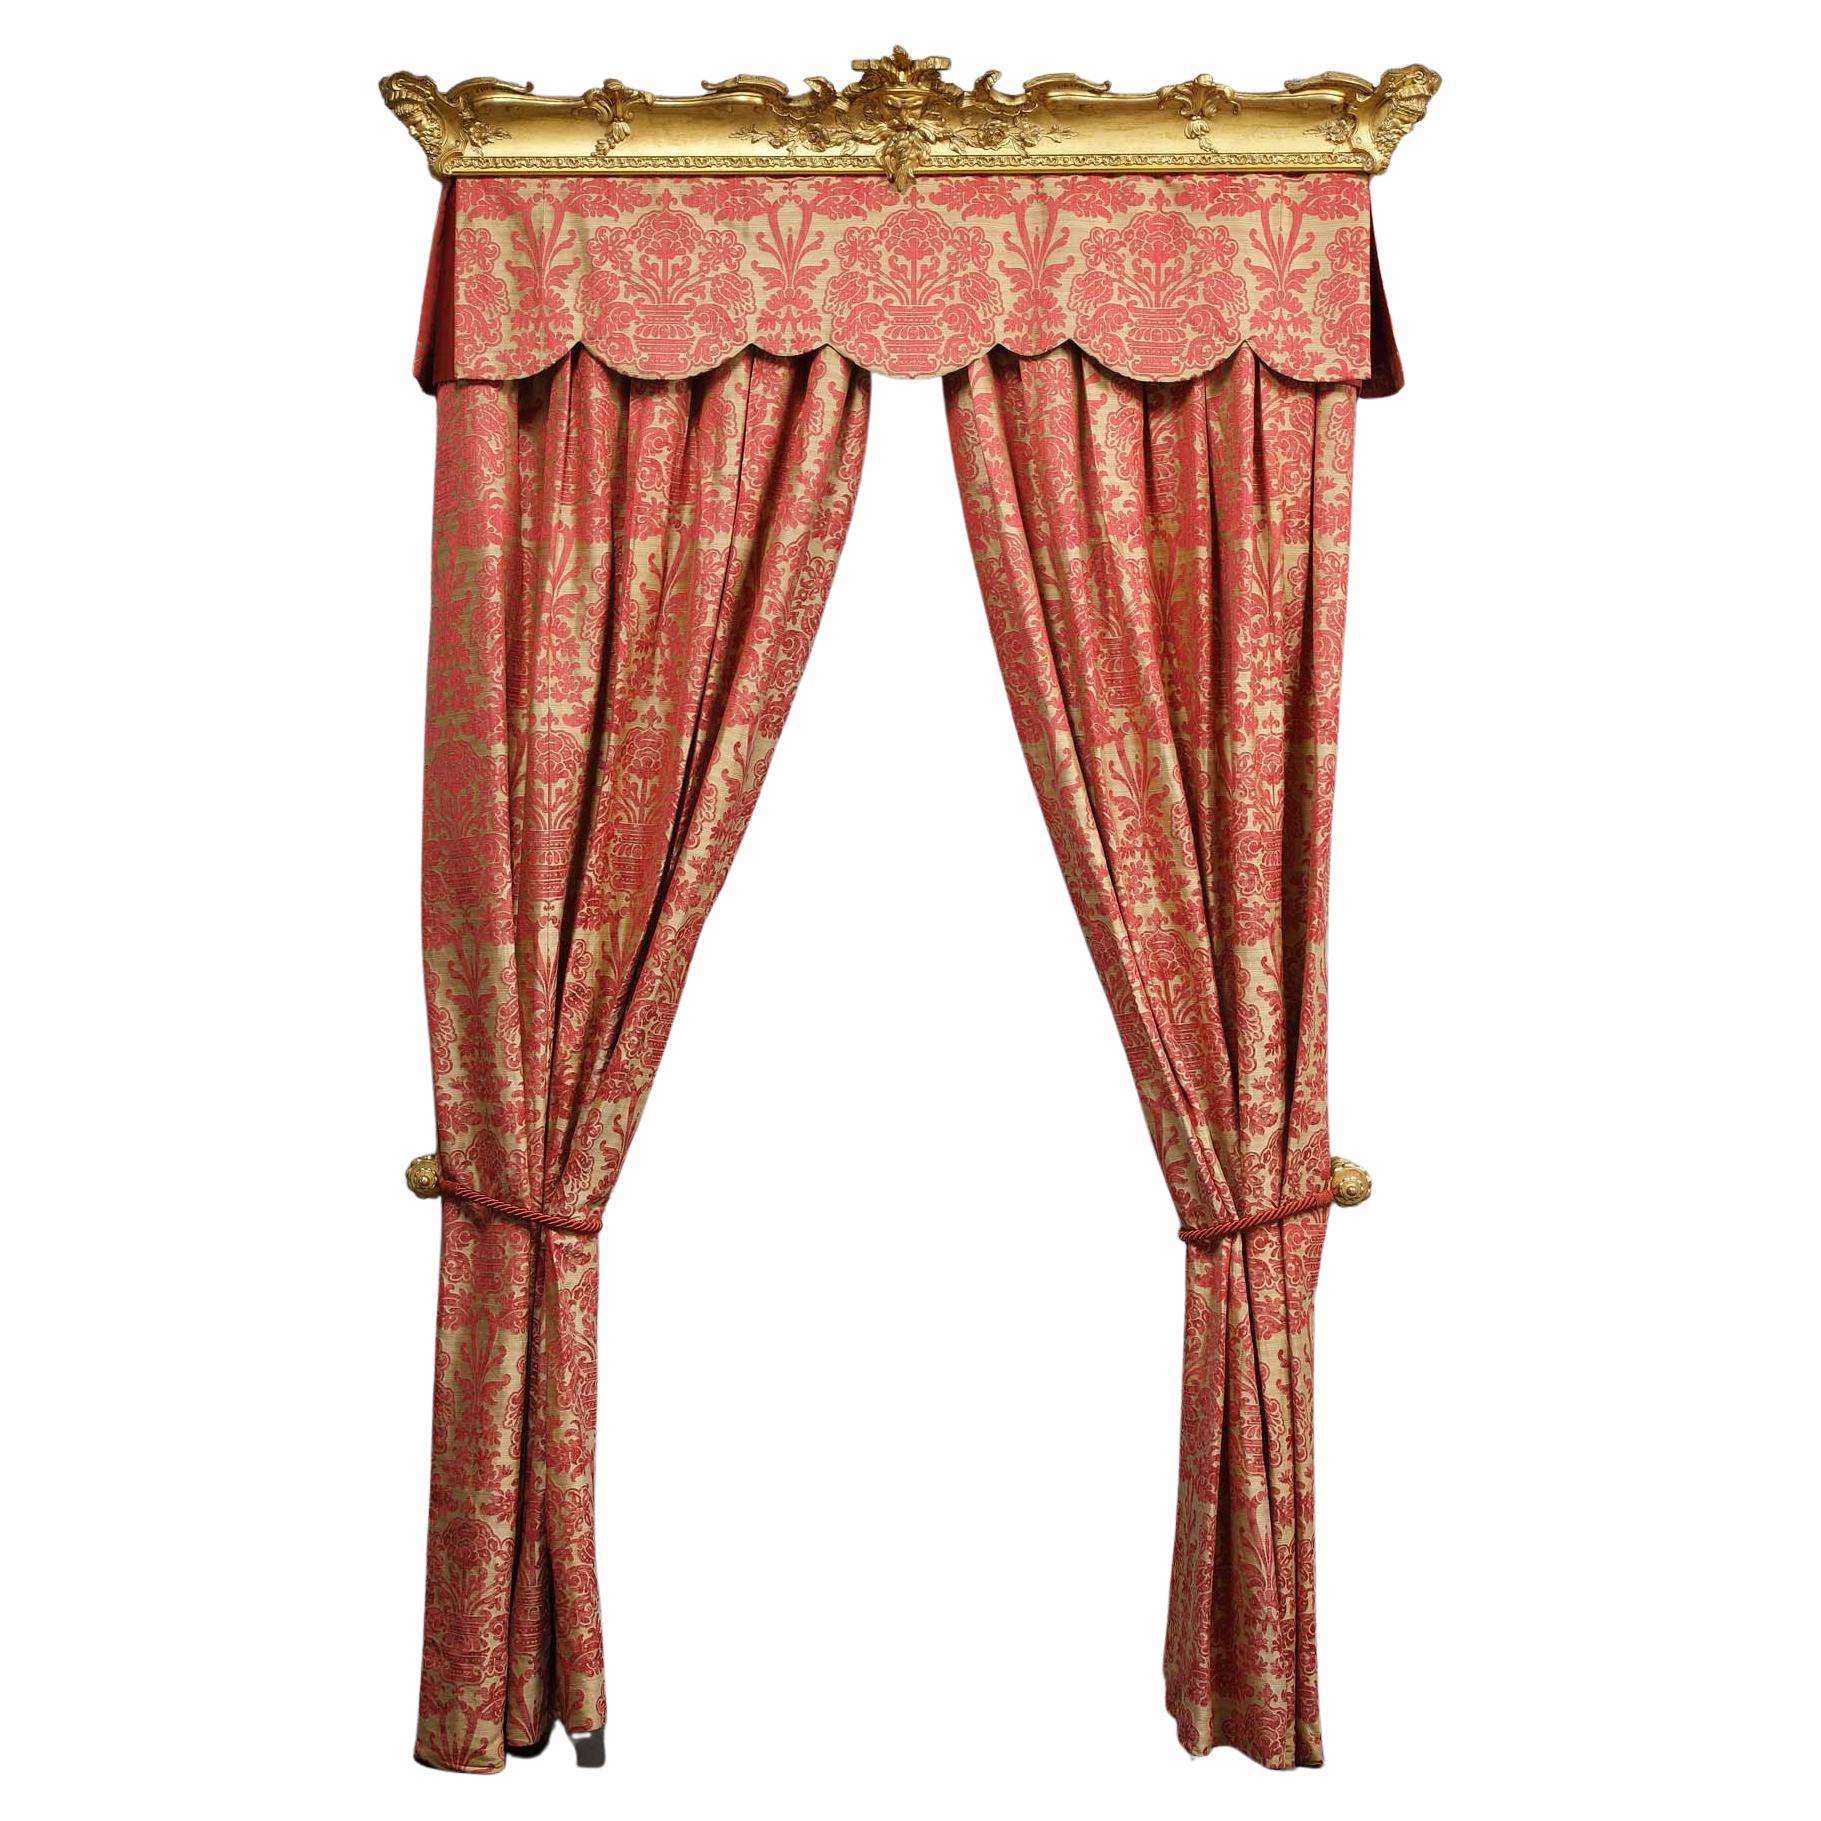 Two pairs of Lucignano curtains by Fadini-Borghi and their valances topped by a gilded wood ramp molded and carved with masks and flowers. The curtains are cotton damask decorated with baskets overflowing with red flowers on a yellow background. The